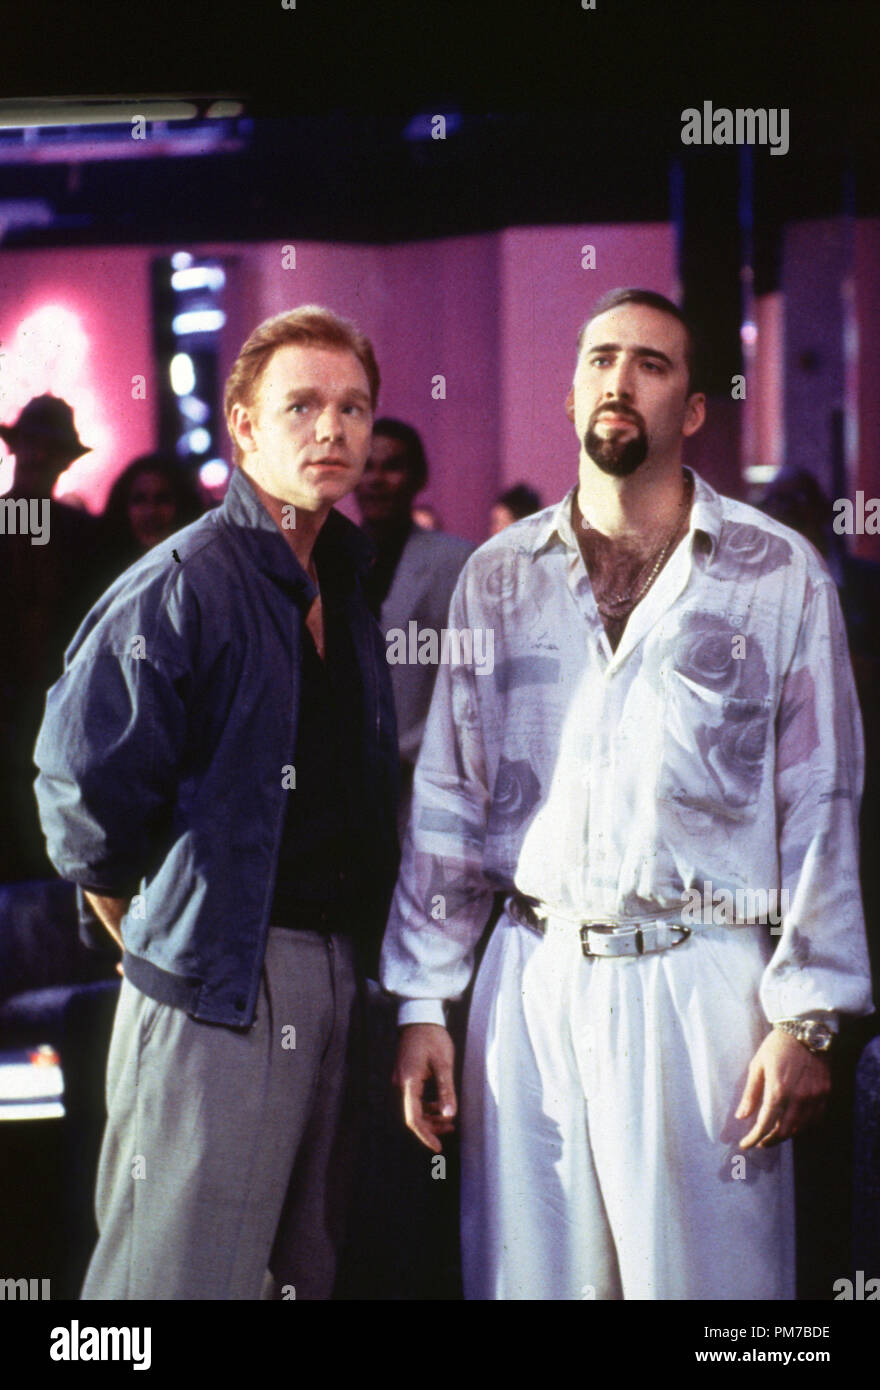 Film Still from "Kiss of Death" David Caruso, Nicolas Cage © 1995 20th  Century Fox Photo Credit: James Bridges File Reference # 31043270THA For  Editorial Use Only - All Rights Reserved Stock Photo - Alamy